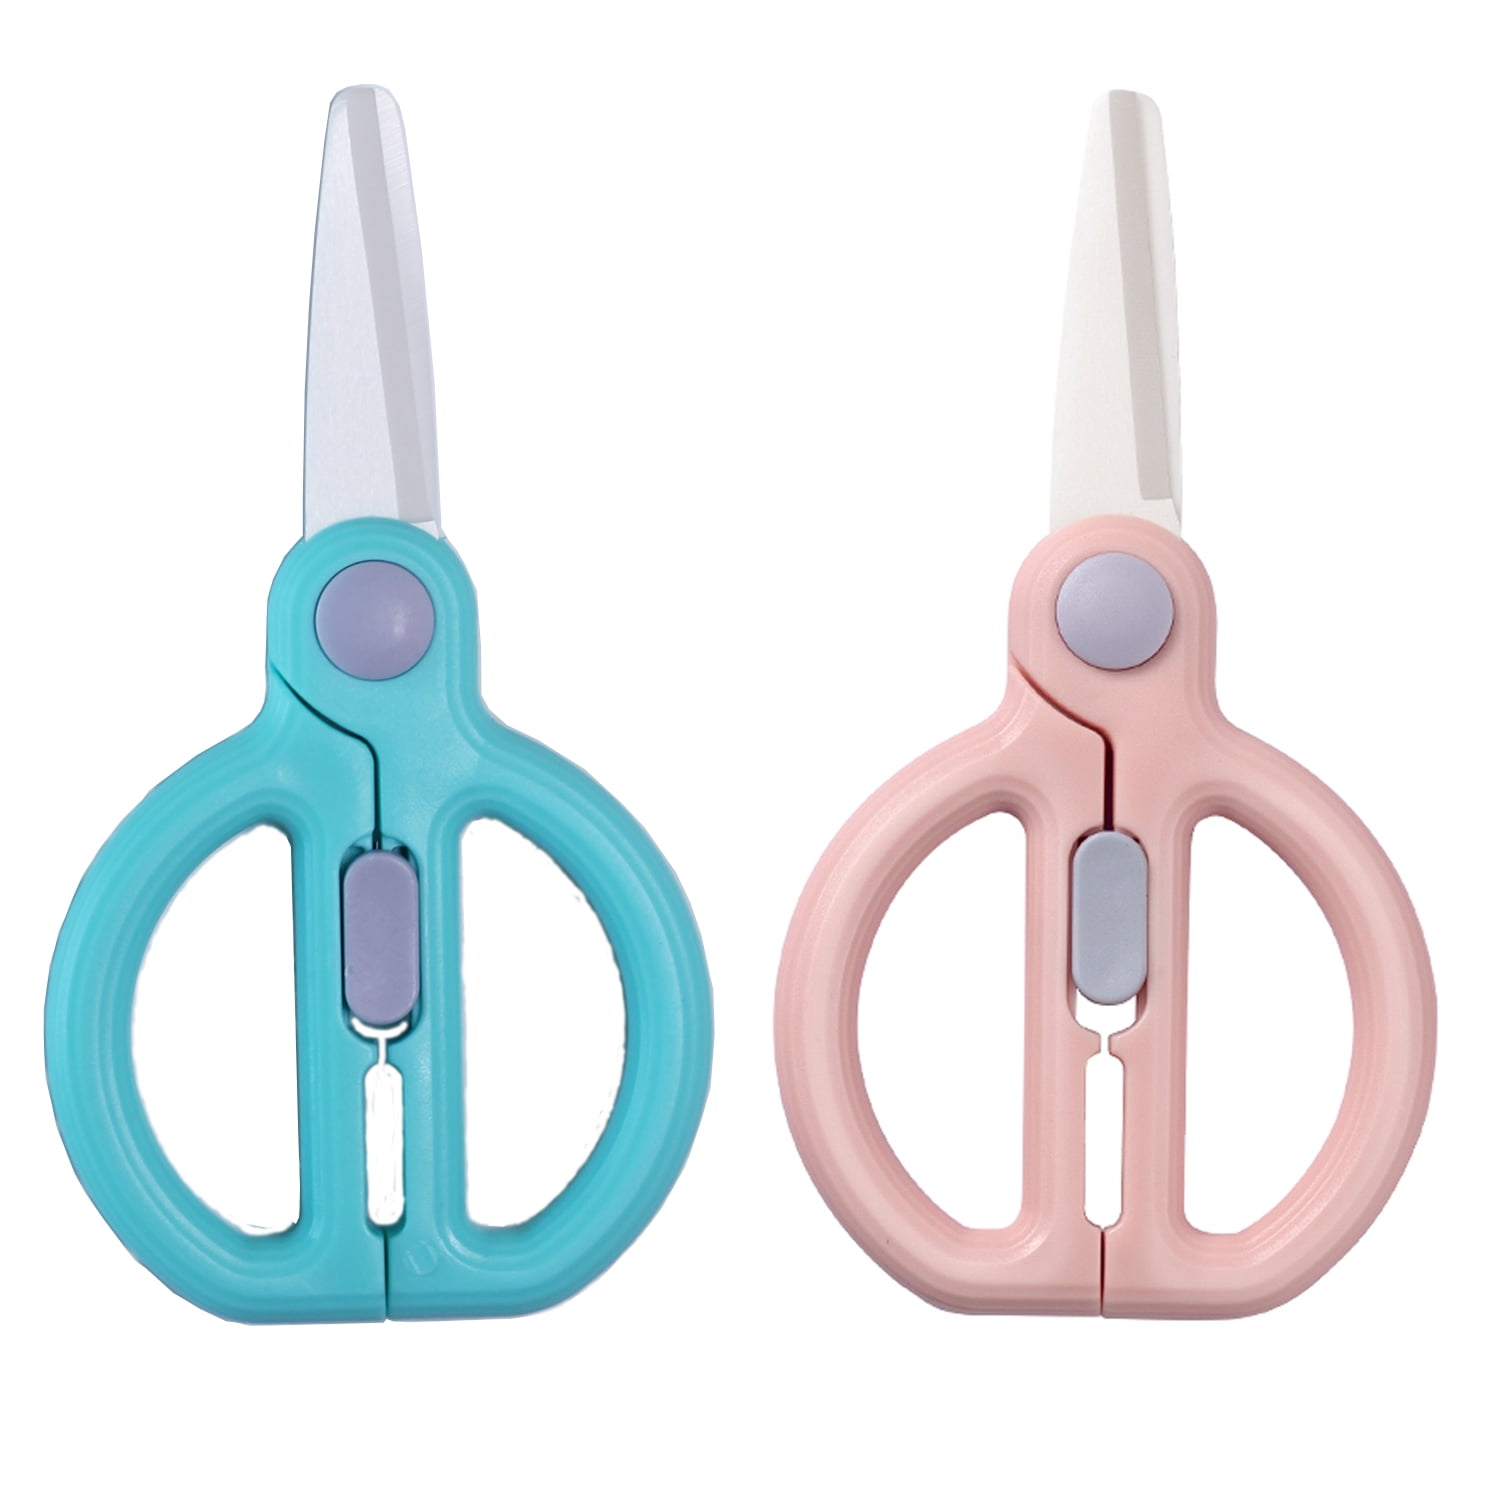 Ceramic Scissors for Baby Food by WELLSTAR, Safety Healthy BPA Free Portable Toddler Shears with Protective Blade Cover and Travel Case, 2 Pack